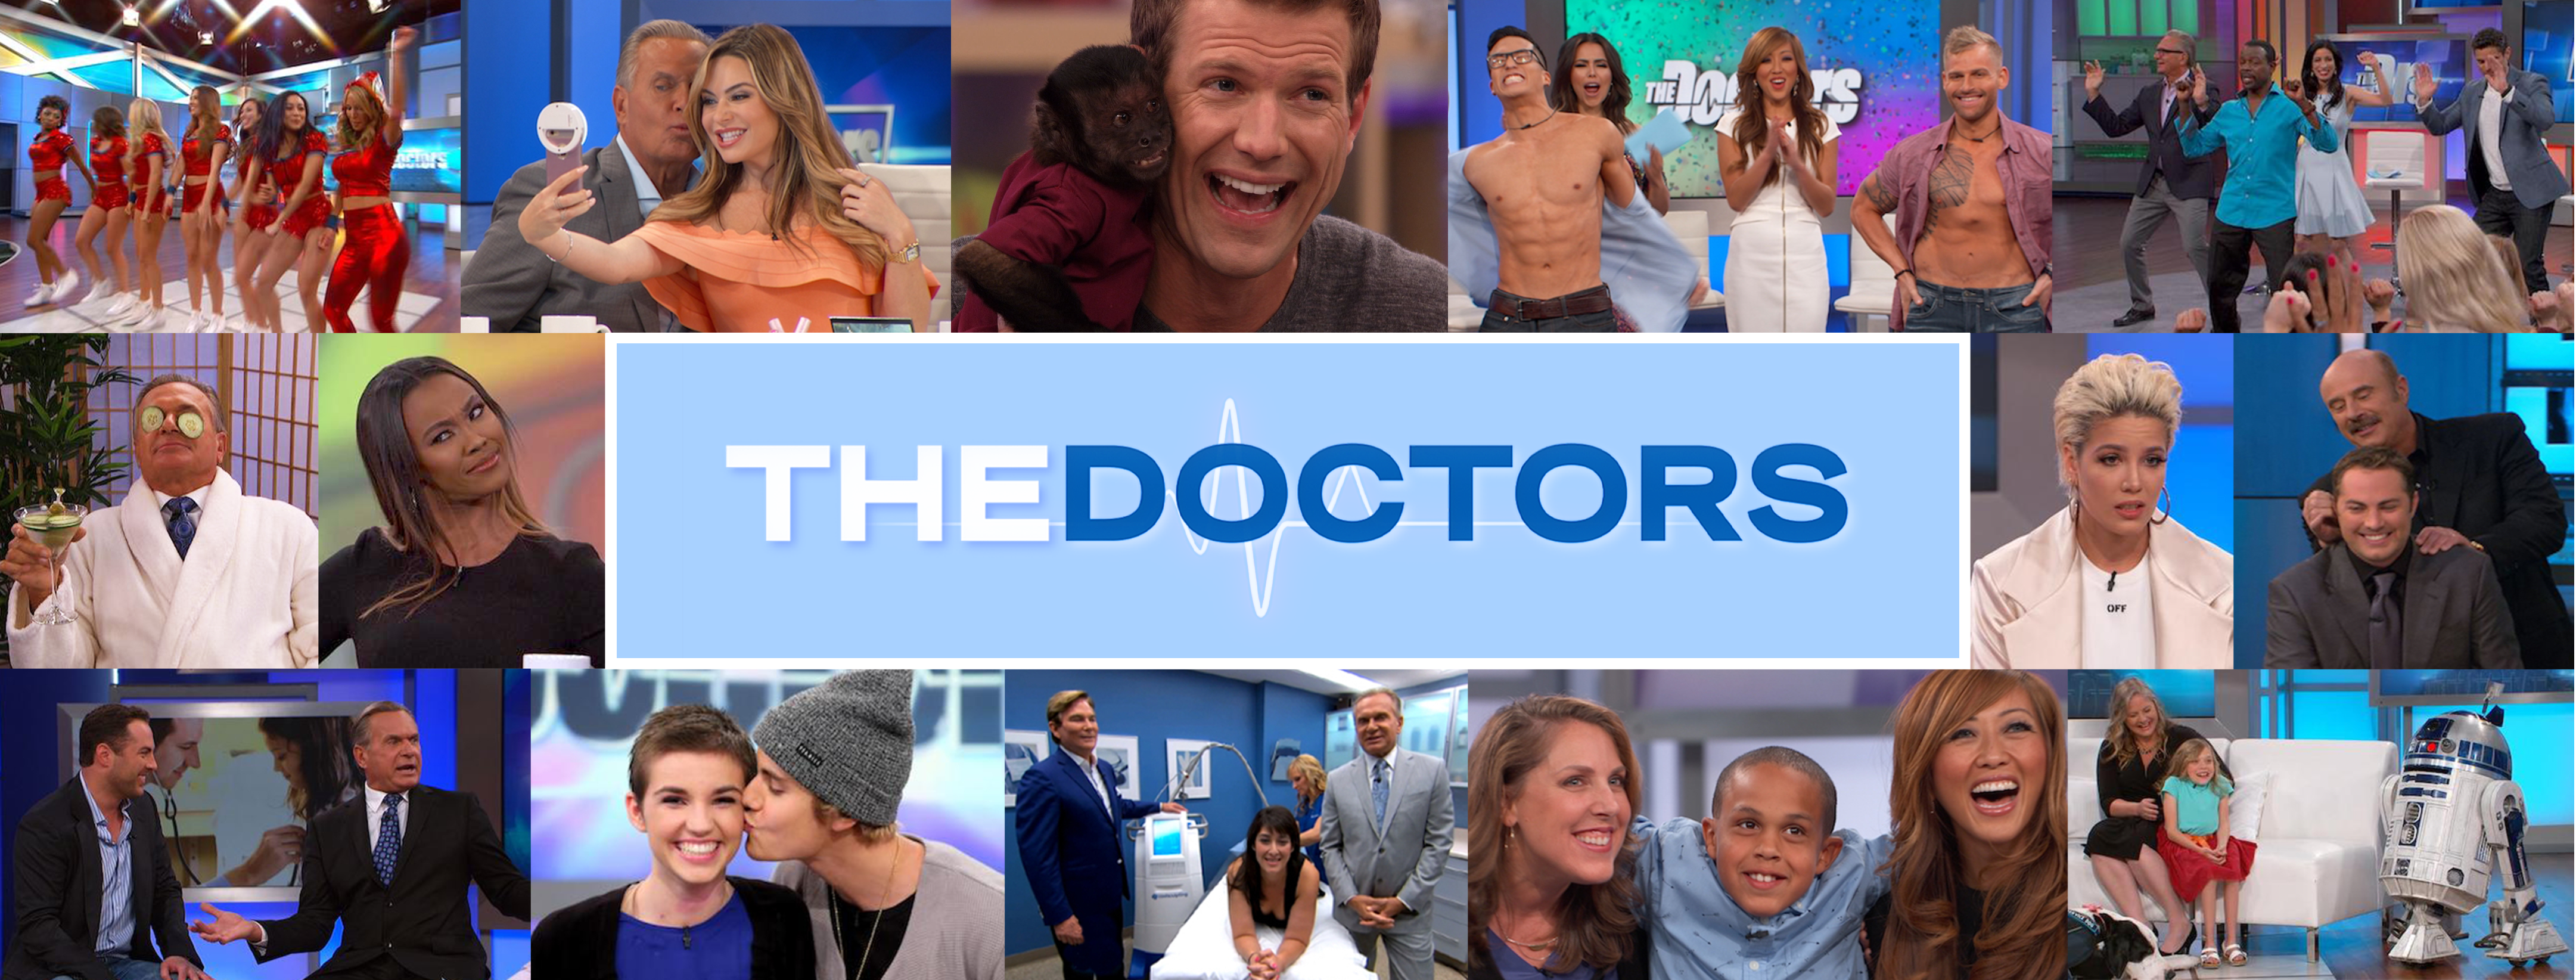 Secrets Your Feet Tell about Your Health | The Doctors TV Show